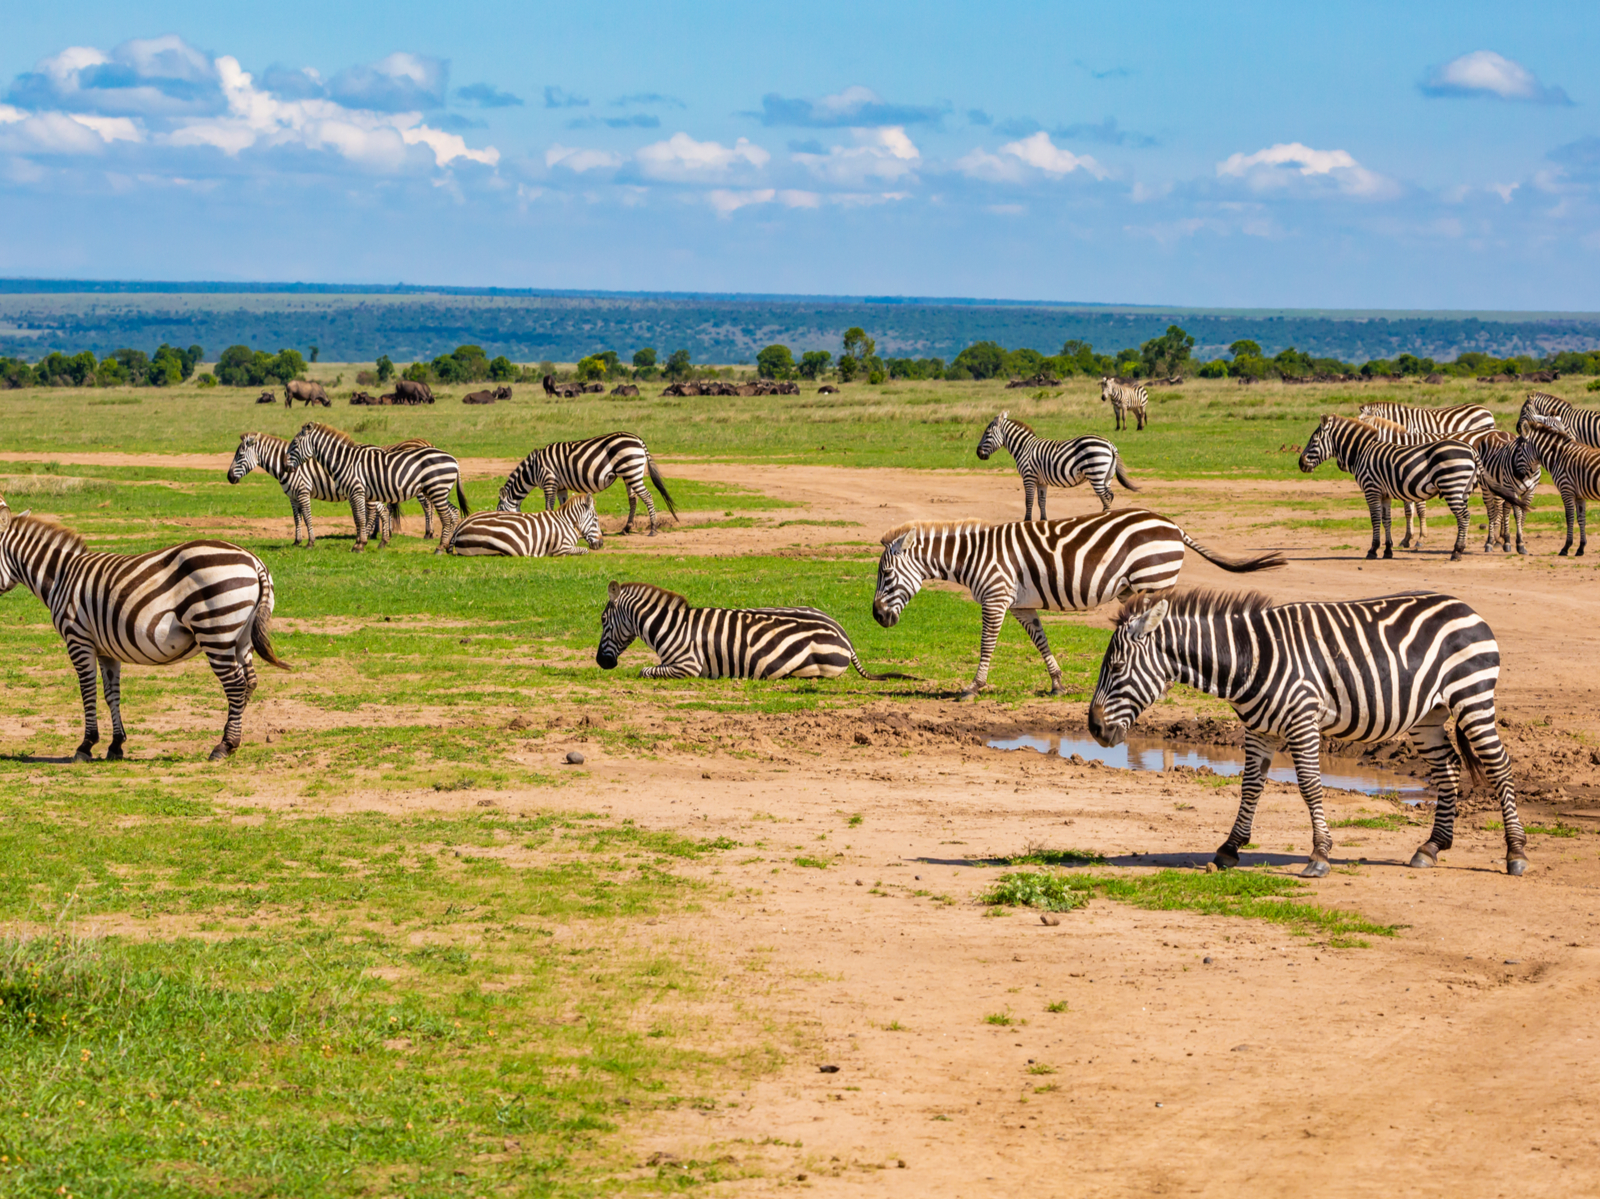 For a piece on the best safaris in Africa, zebras at the Laikipia Plateau